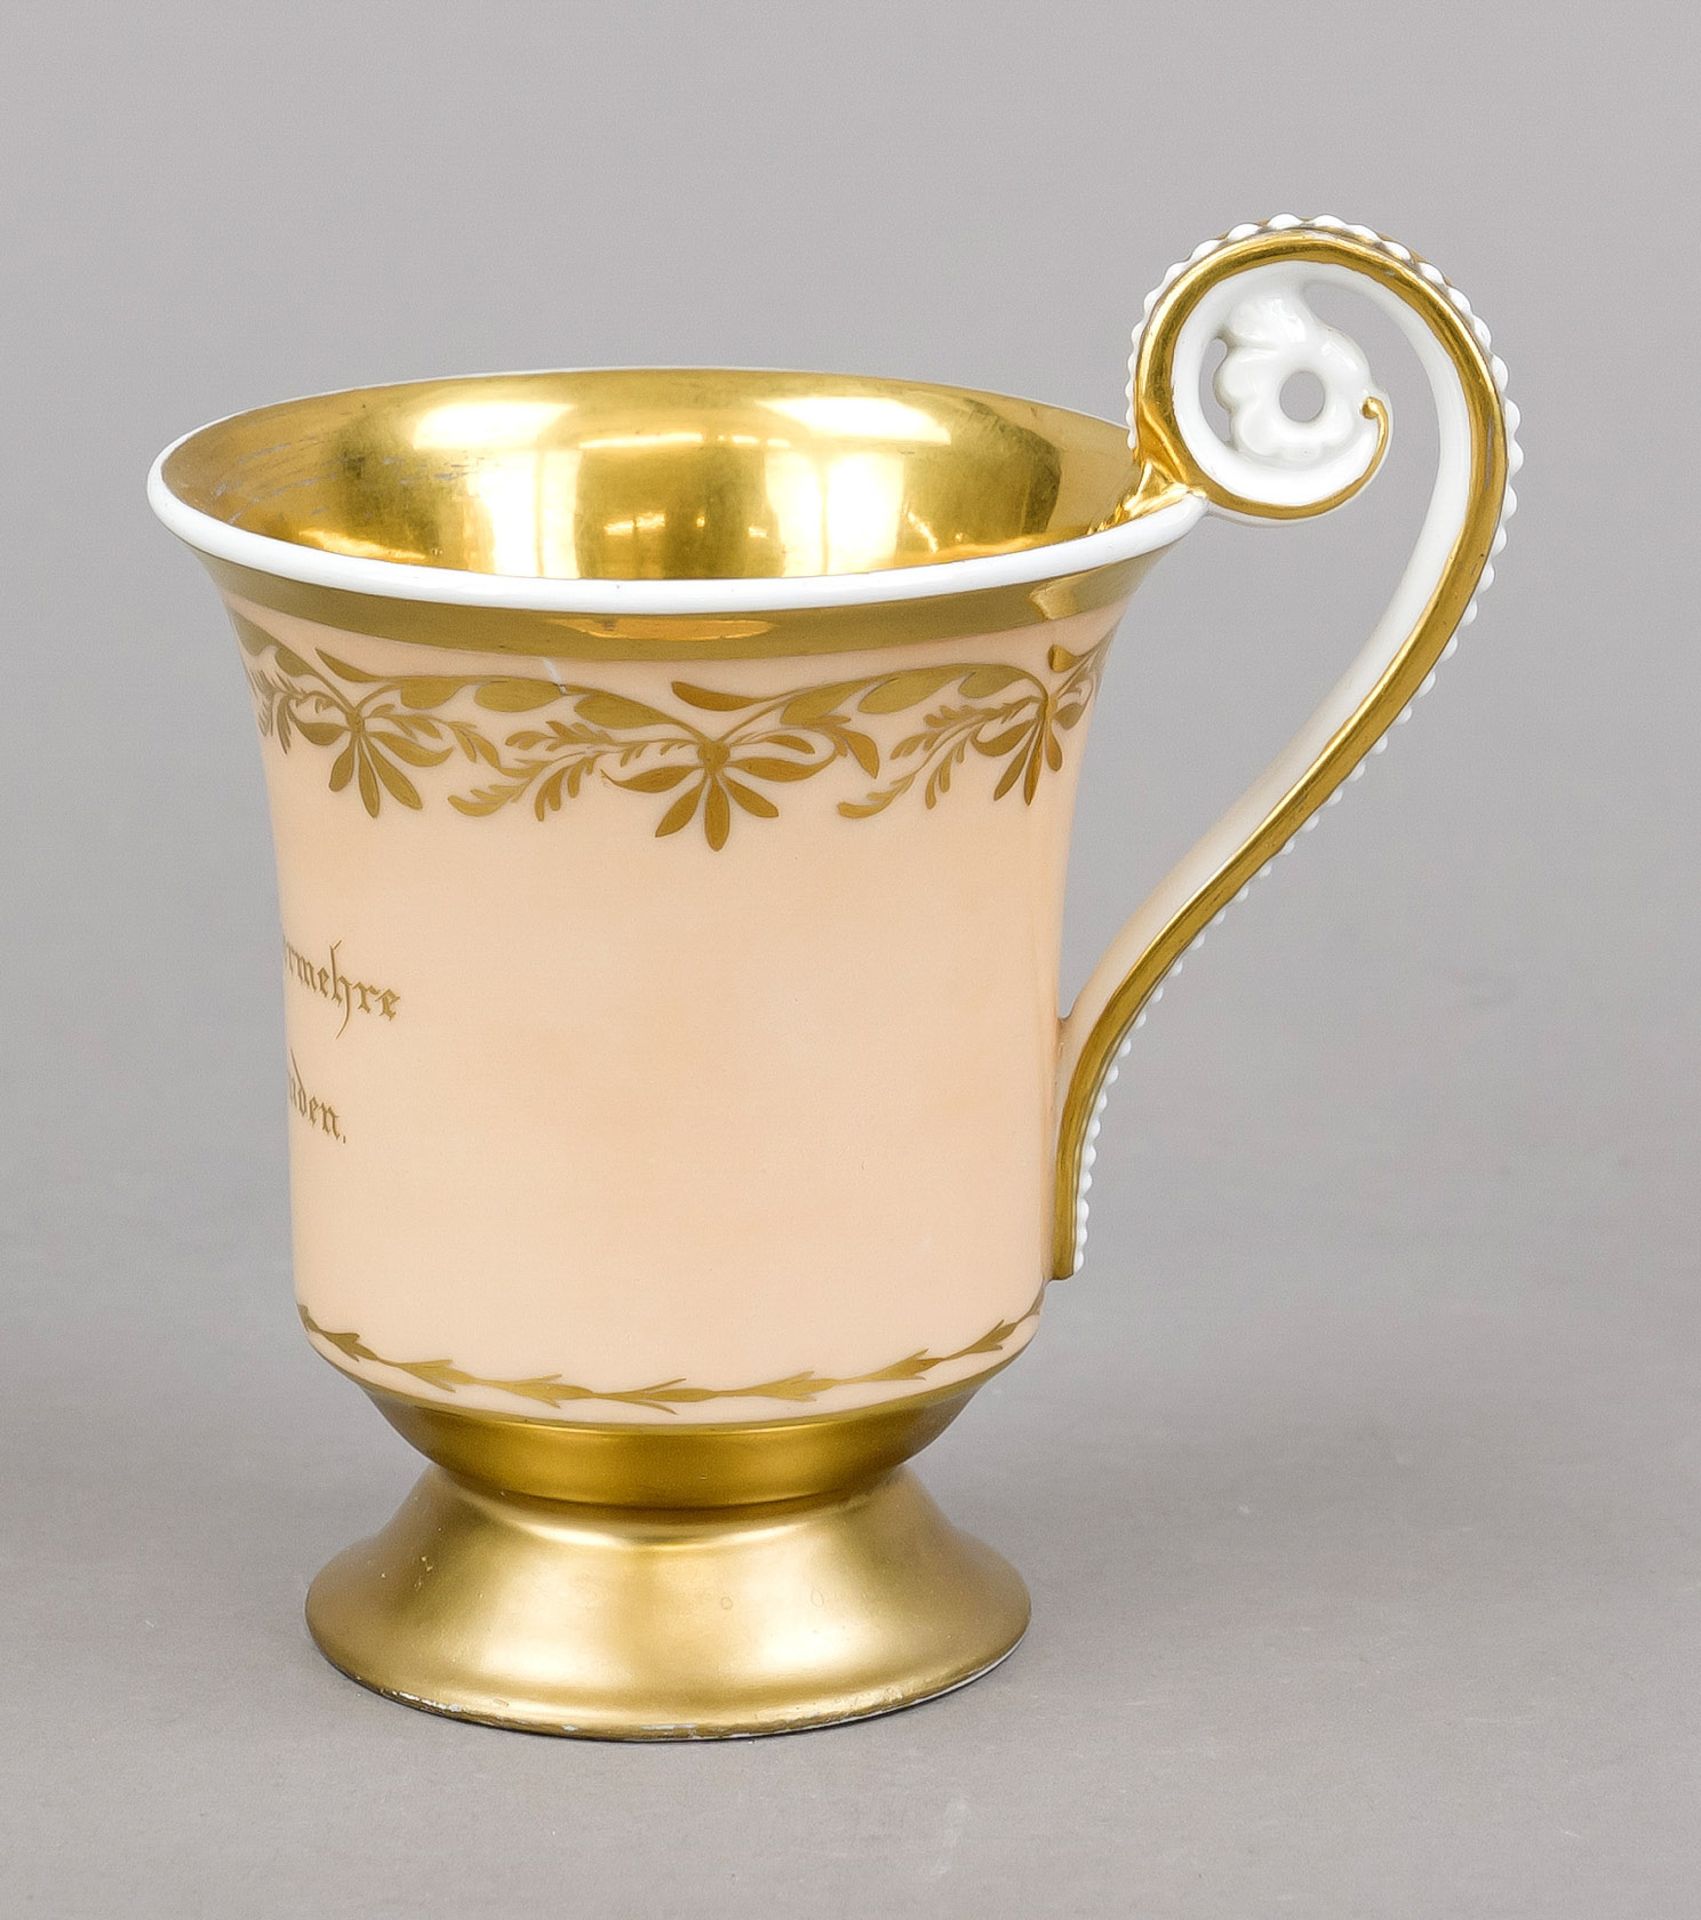 Cup with saucer, KPM Berlin, 1830s, 1st choice, bell shape with rosette handle, apricot ground - Image 2 of 2